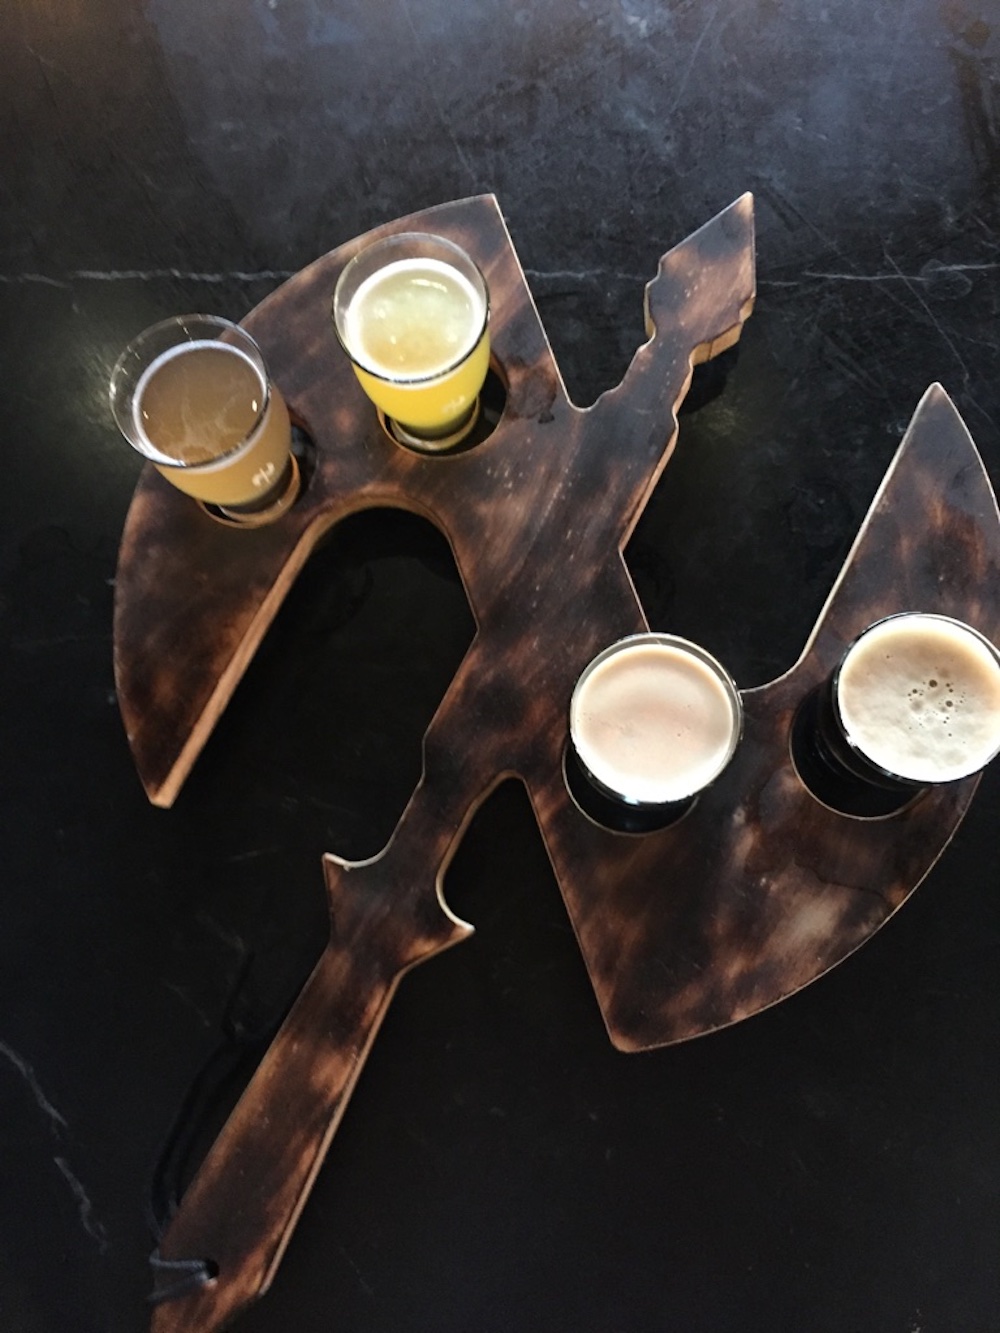 Flight of beers in a battle axe shaped folder at Nortons Brewing Company in Wichita, Kansas